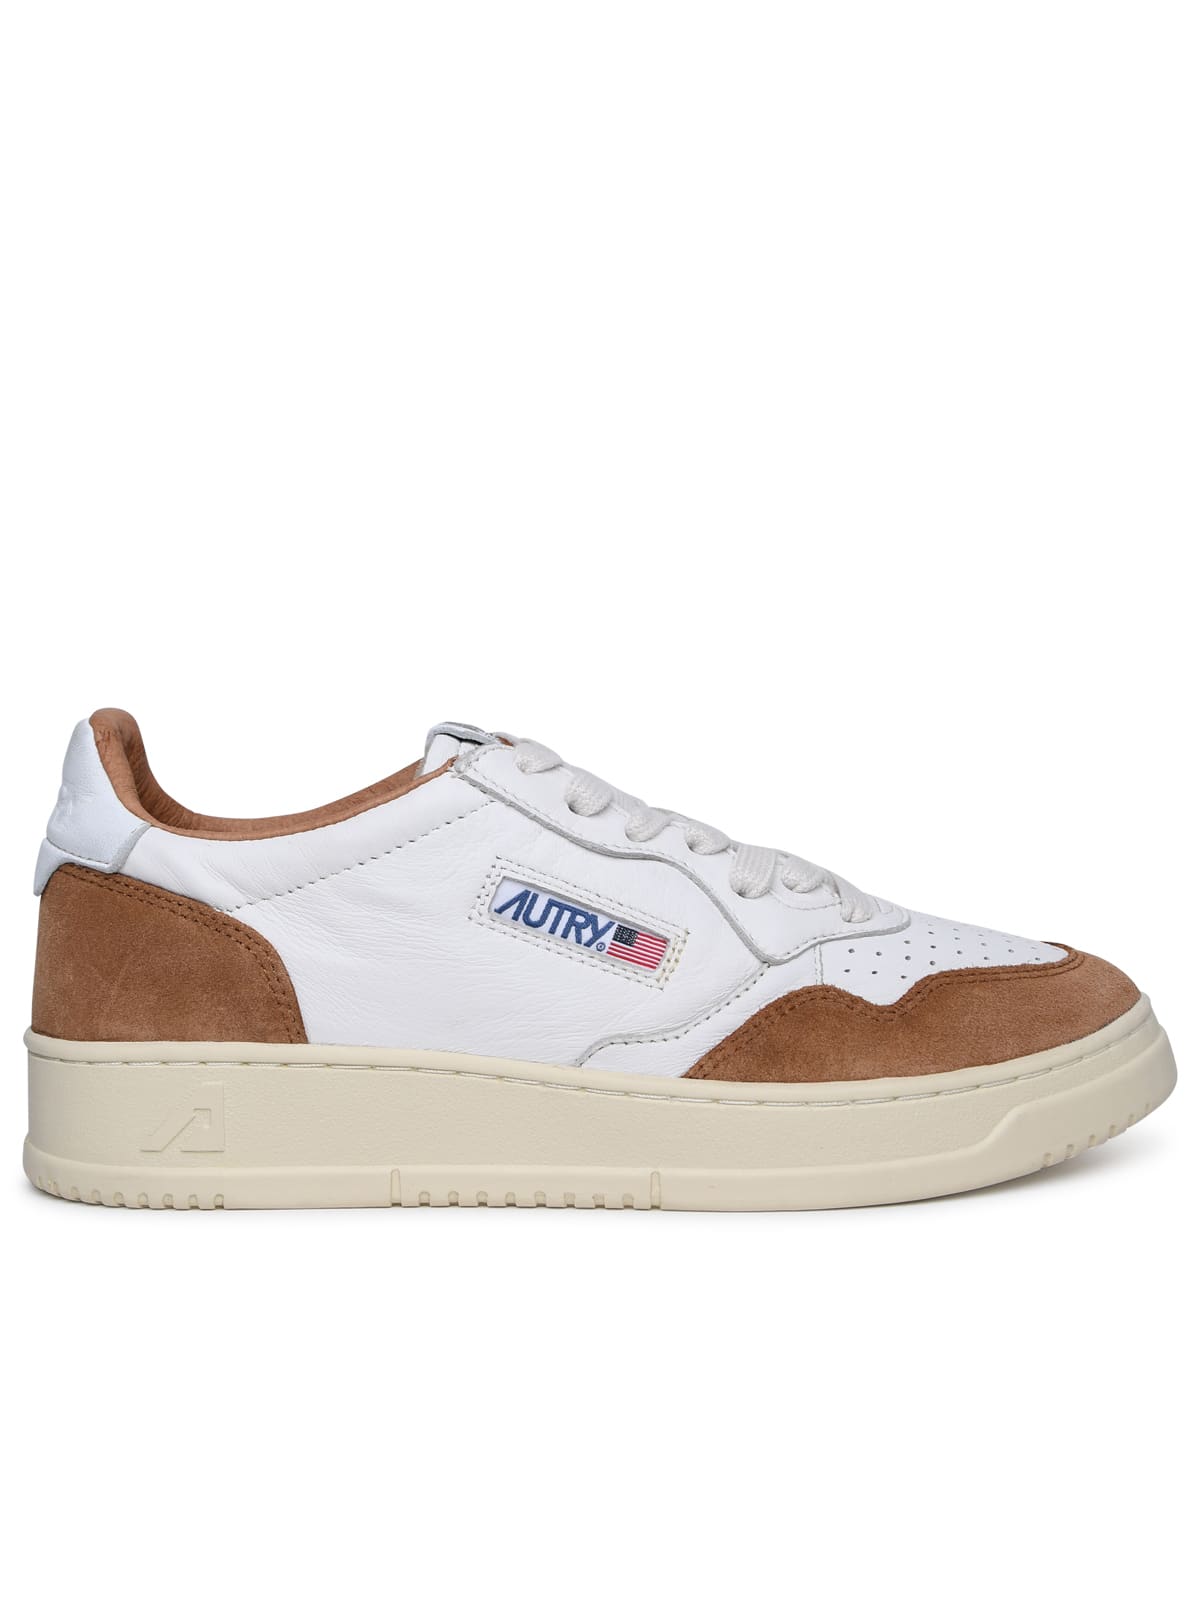 Autry Medalist Sneakers In Goat Leather And White Suede In Brown